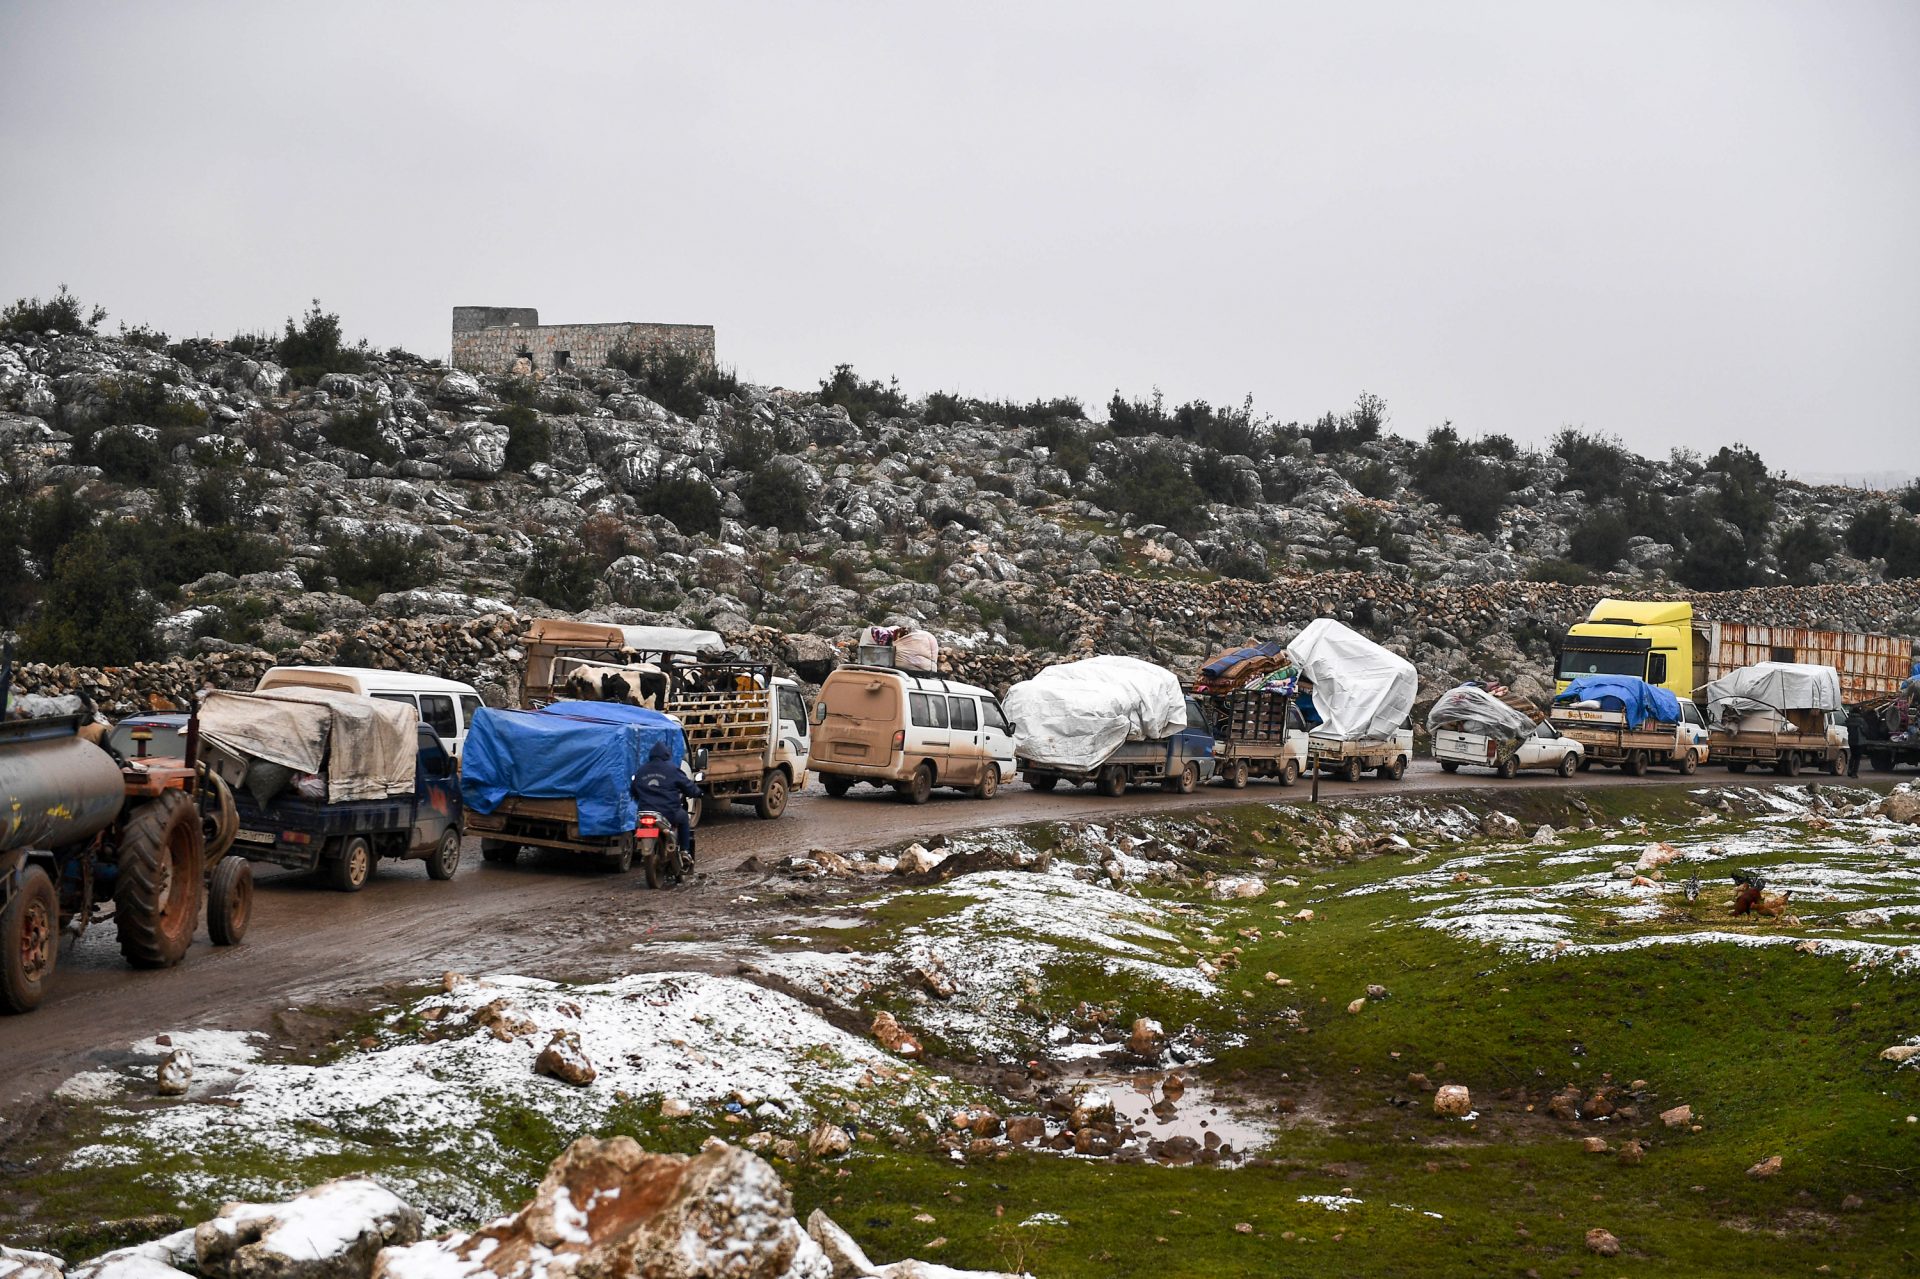 Syrian civilians flee from Idlib, seeking safety from the fighting that began escalating in December. The photo was taken on February 13.